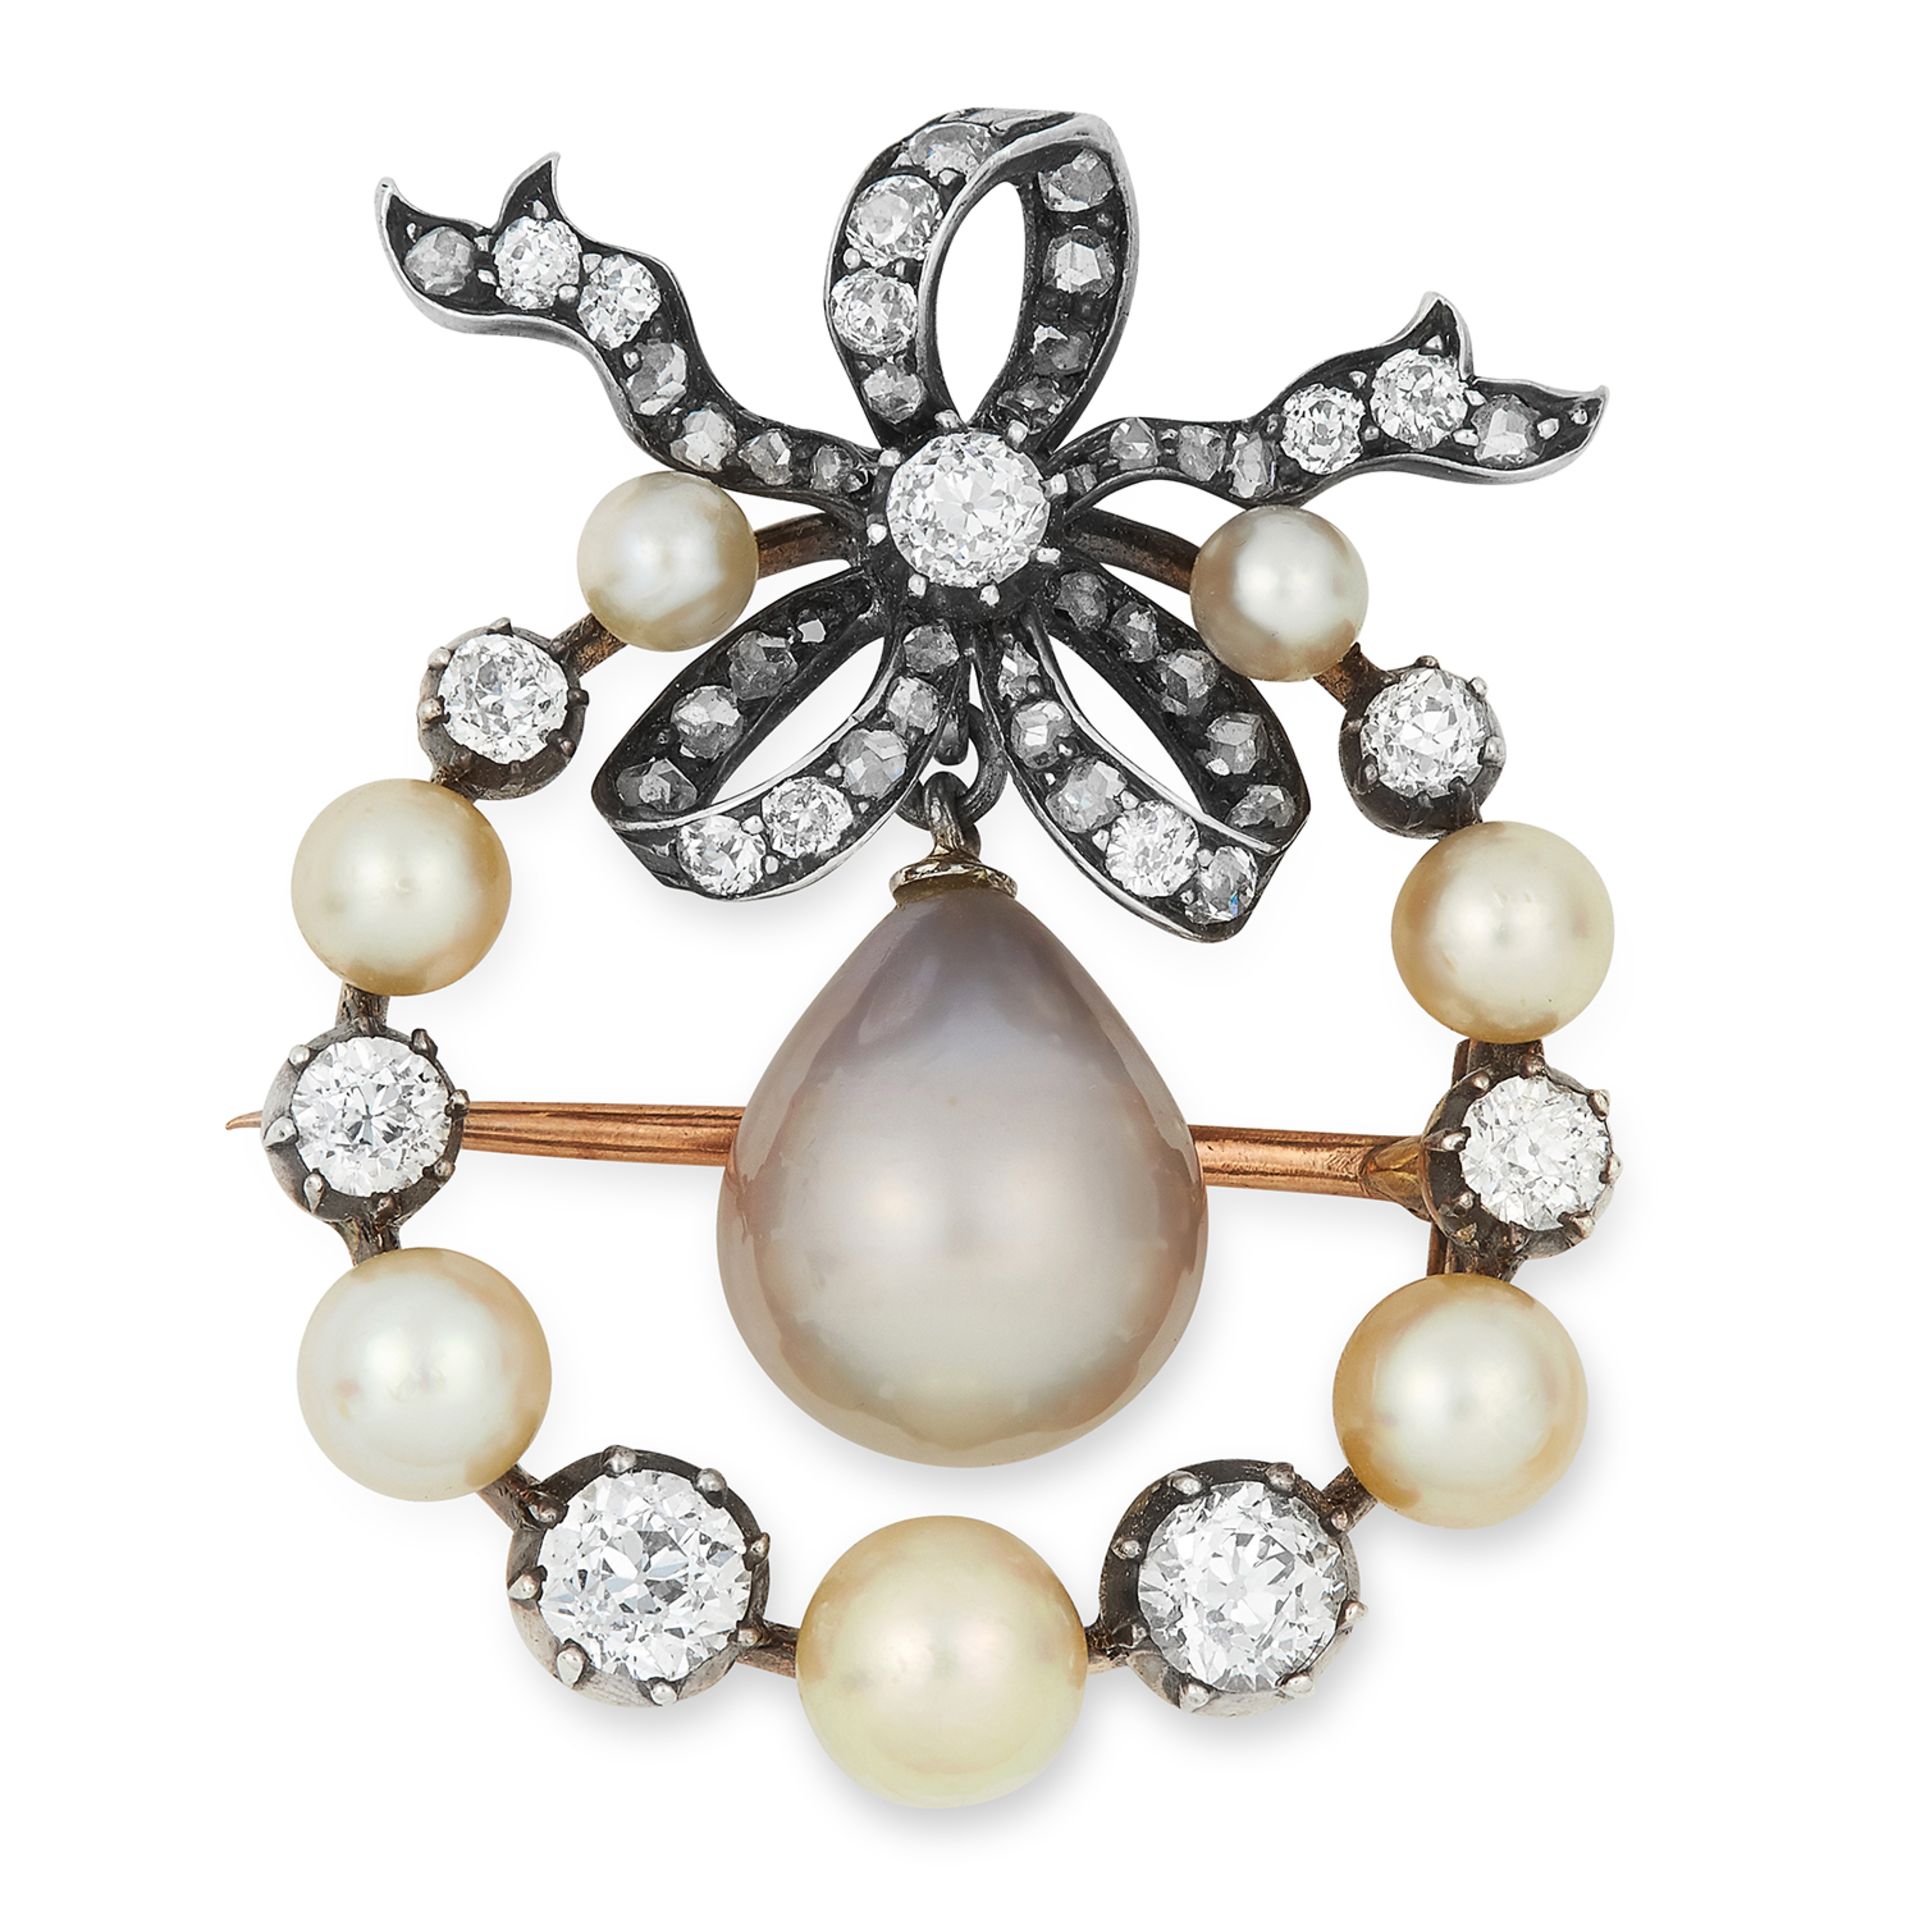 ANTIQUE NATURAL PEARL AND DIAMOND BOW BROOCH set with pearls and old cut diamonds, suspending a